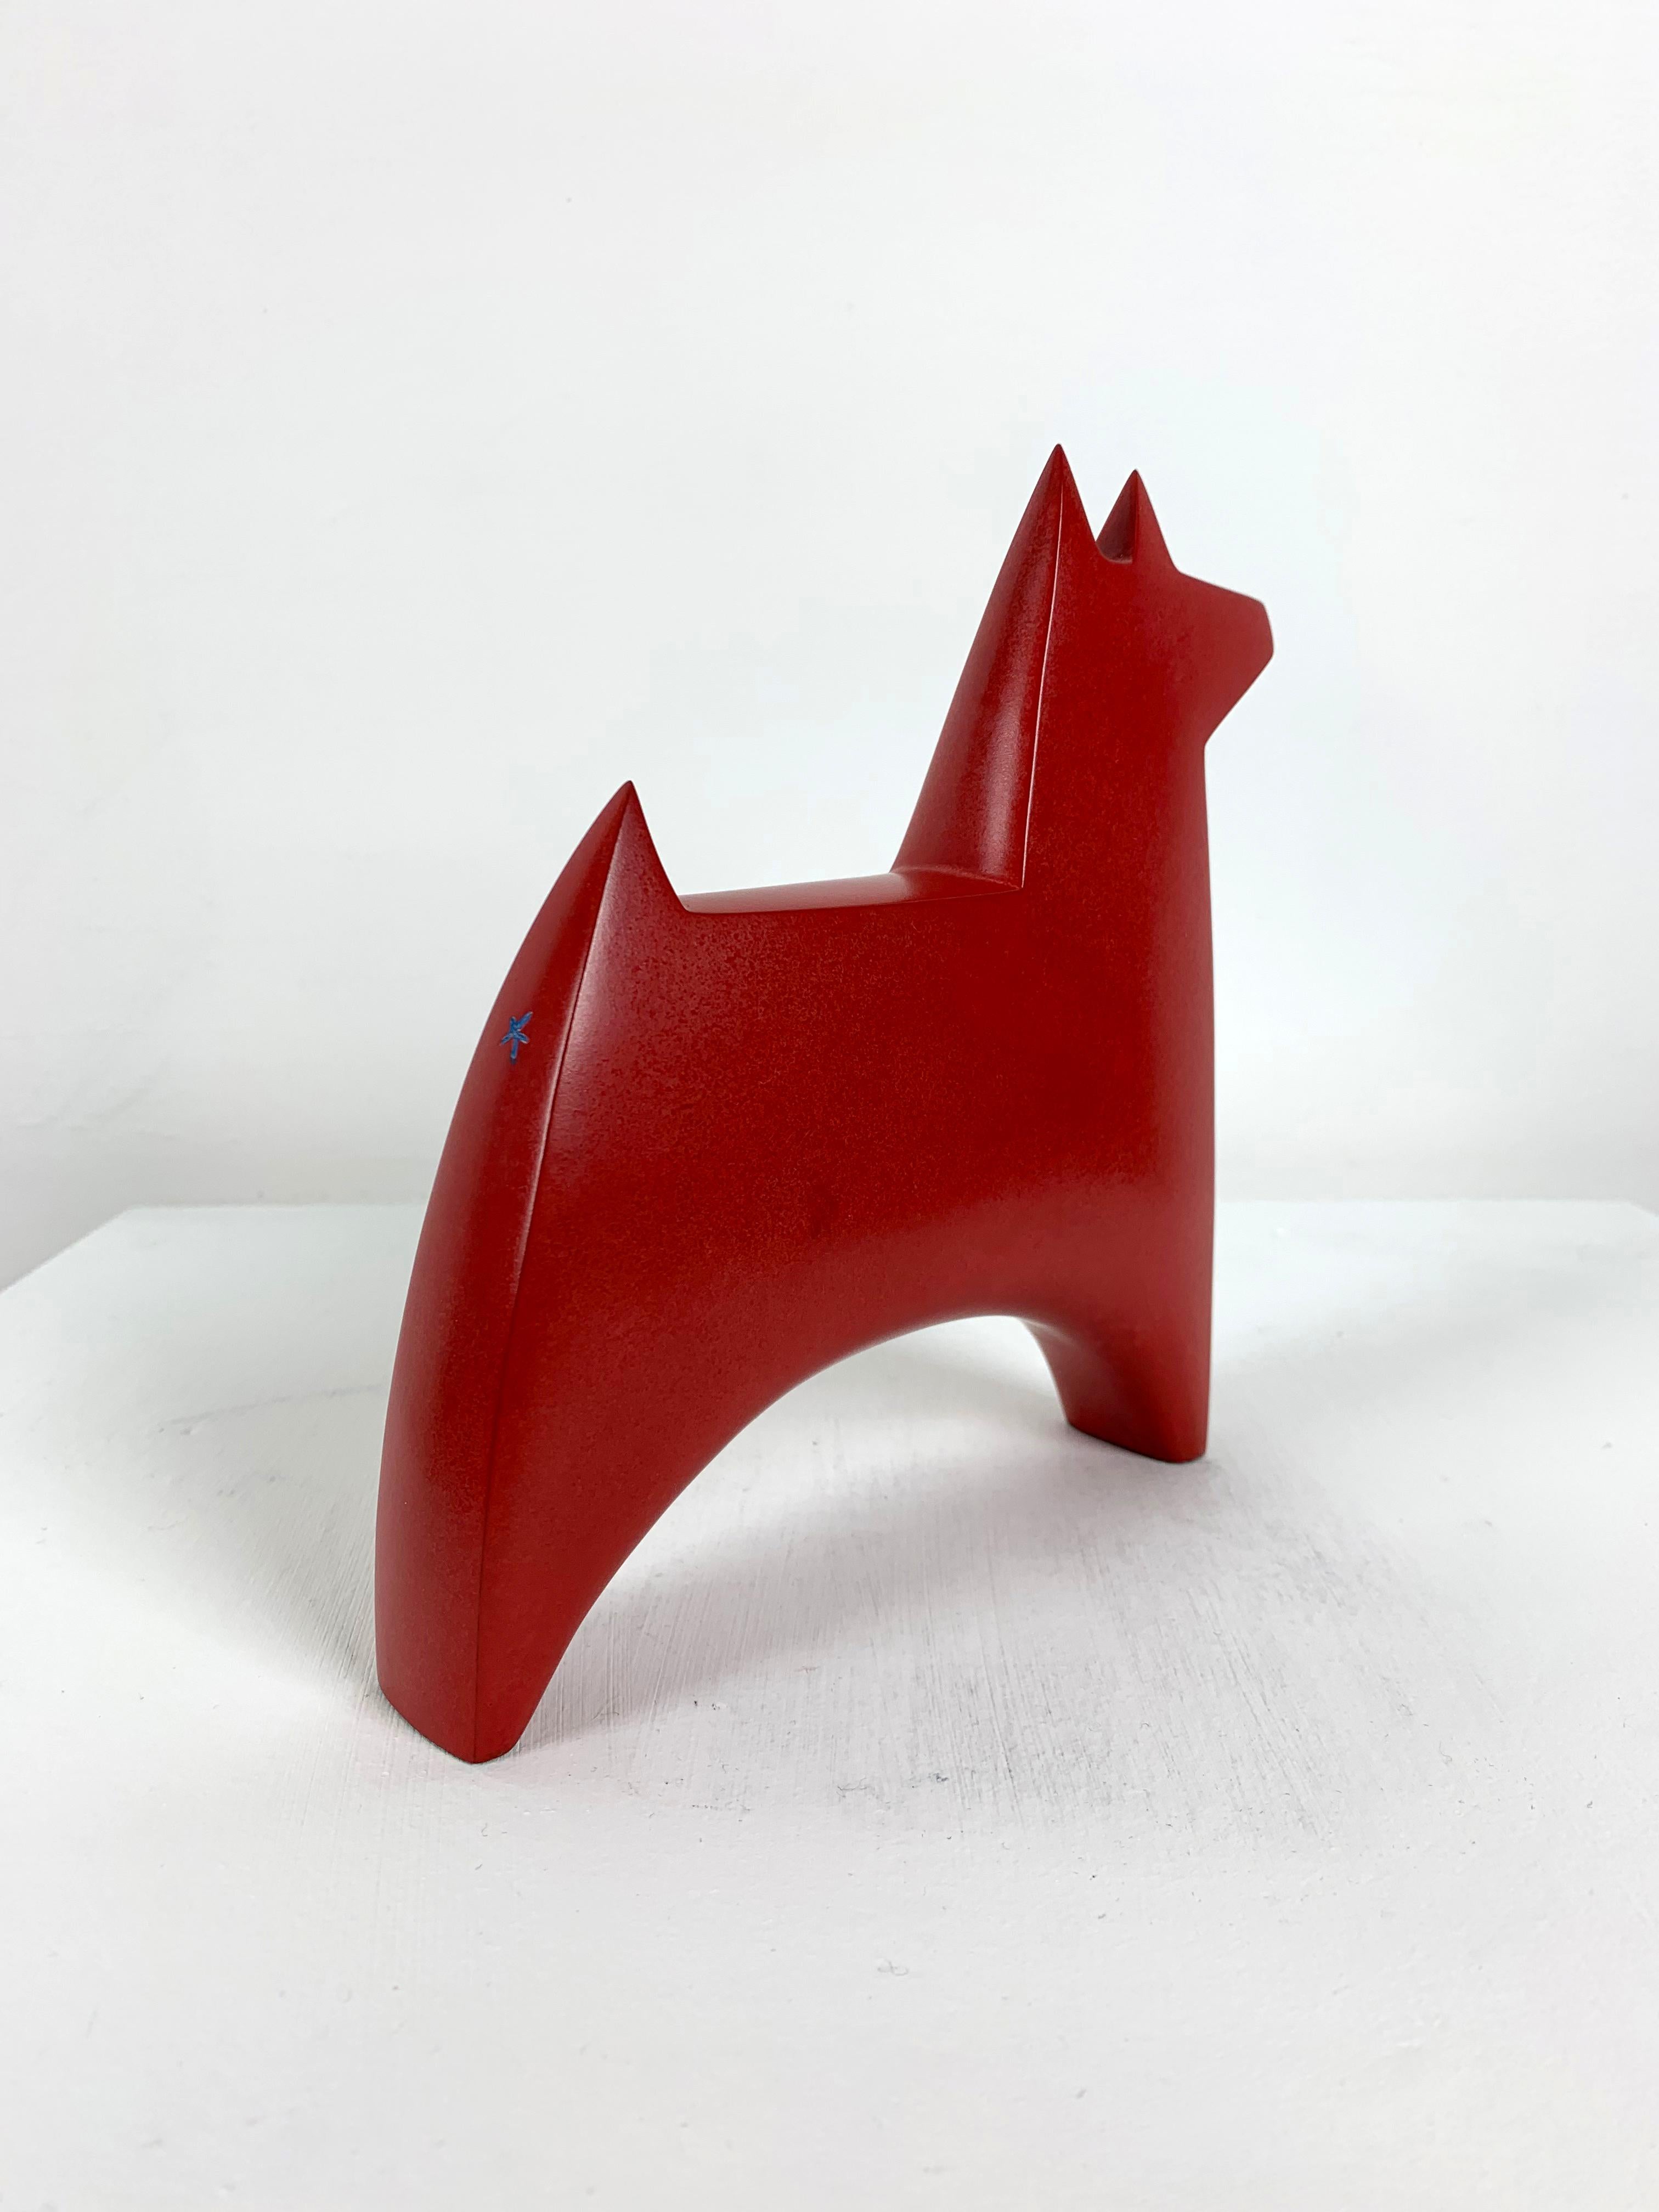 Dogstar, Artist Copy, by Stephen Page, 2017. 

Bronze. Artist Signature and Edition number engraved on the bottom of the piece. 

Stephen Page studied sculpture at Southampton and now lives with his family in rural Mid Wales where he specialises in